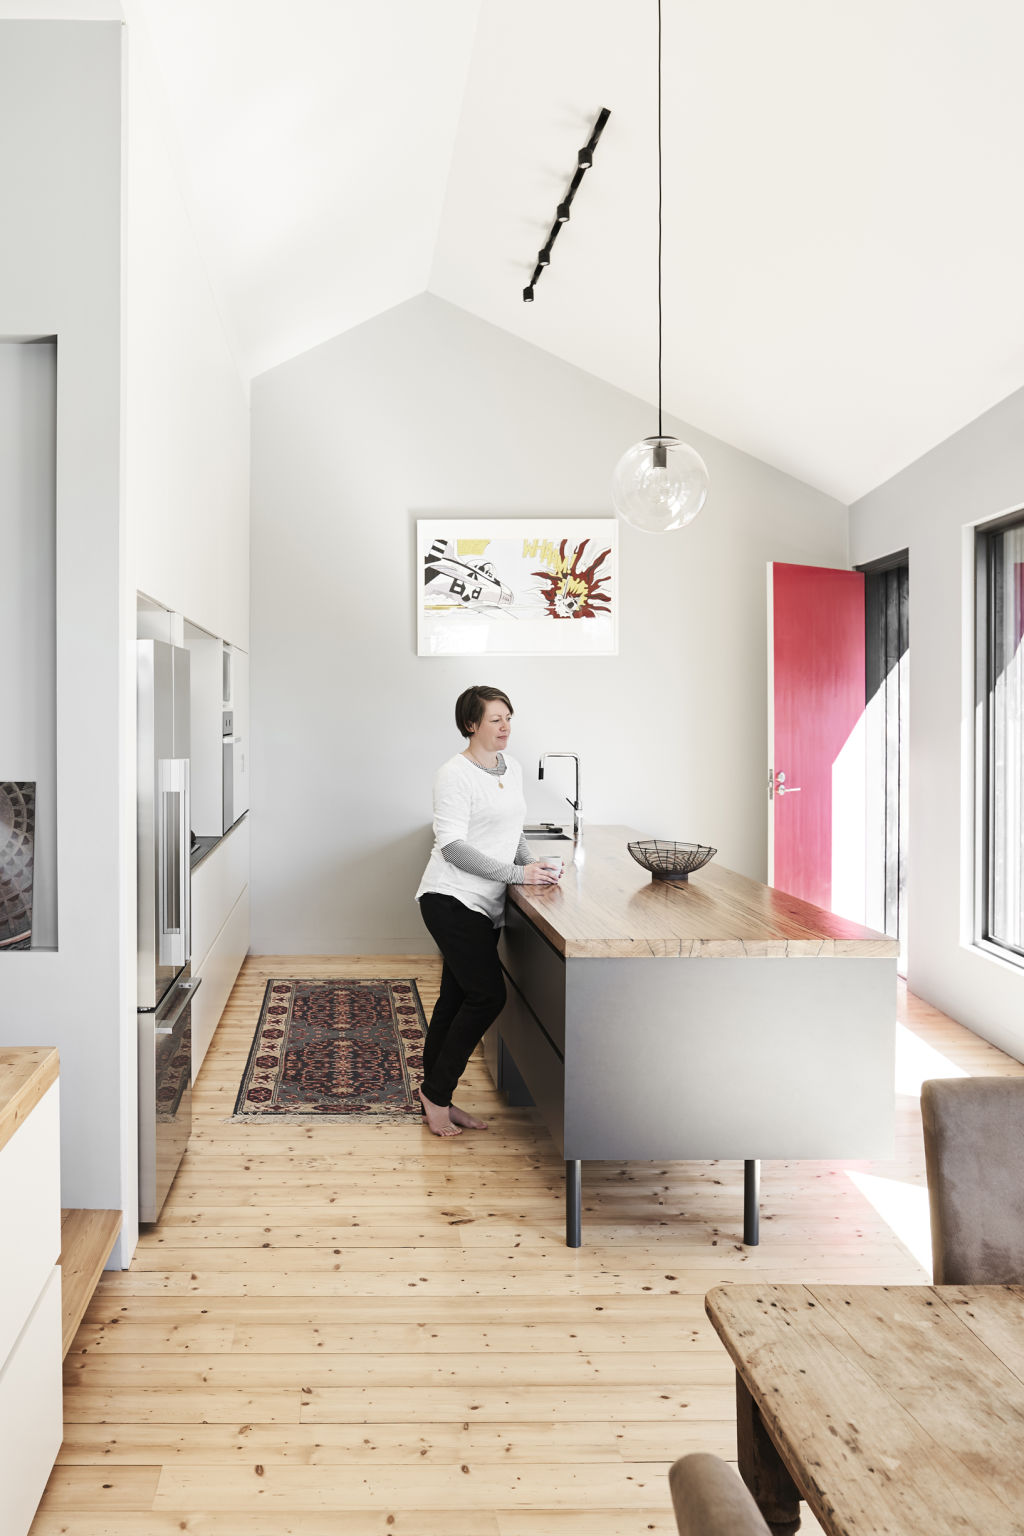 An original plan for an upstairs extension was scotched. Photo: Leon Schoots